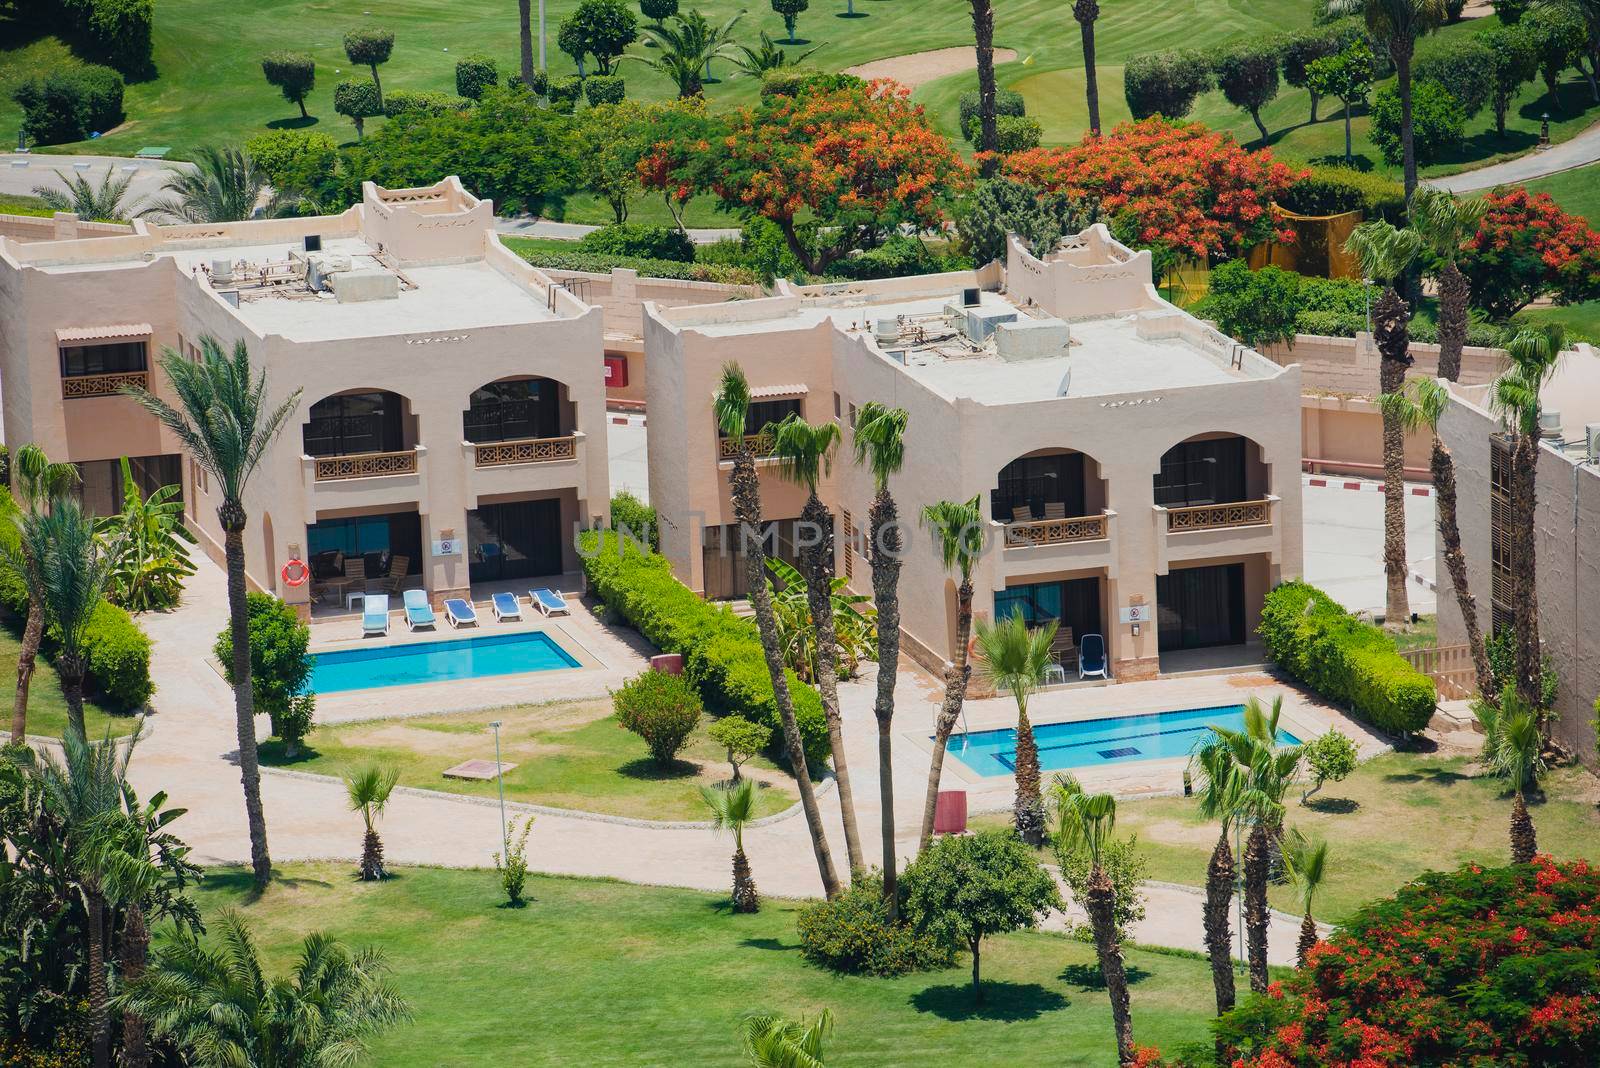 Aerial view over holiday villas with swimming pool in luxury tropical hotel resort with gardens and golf course